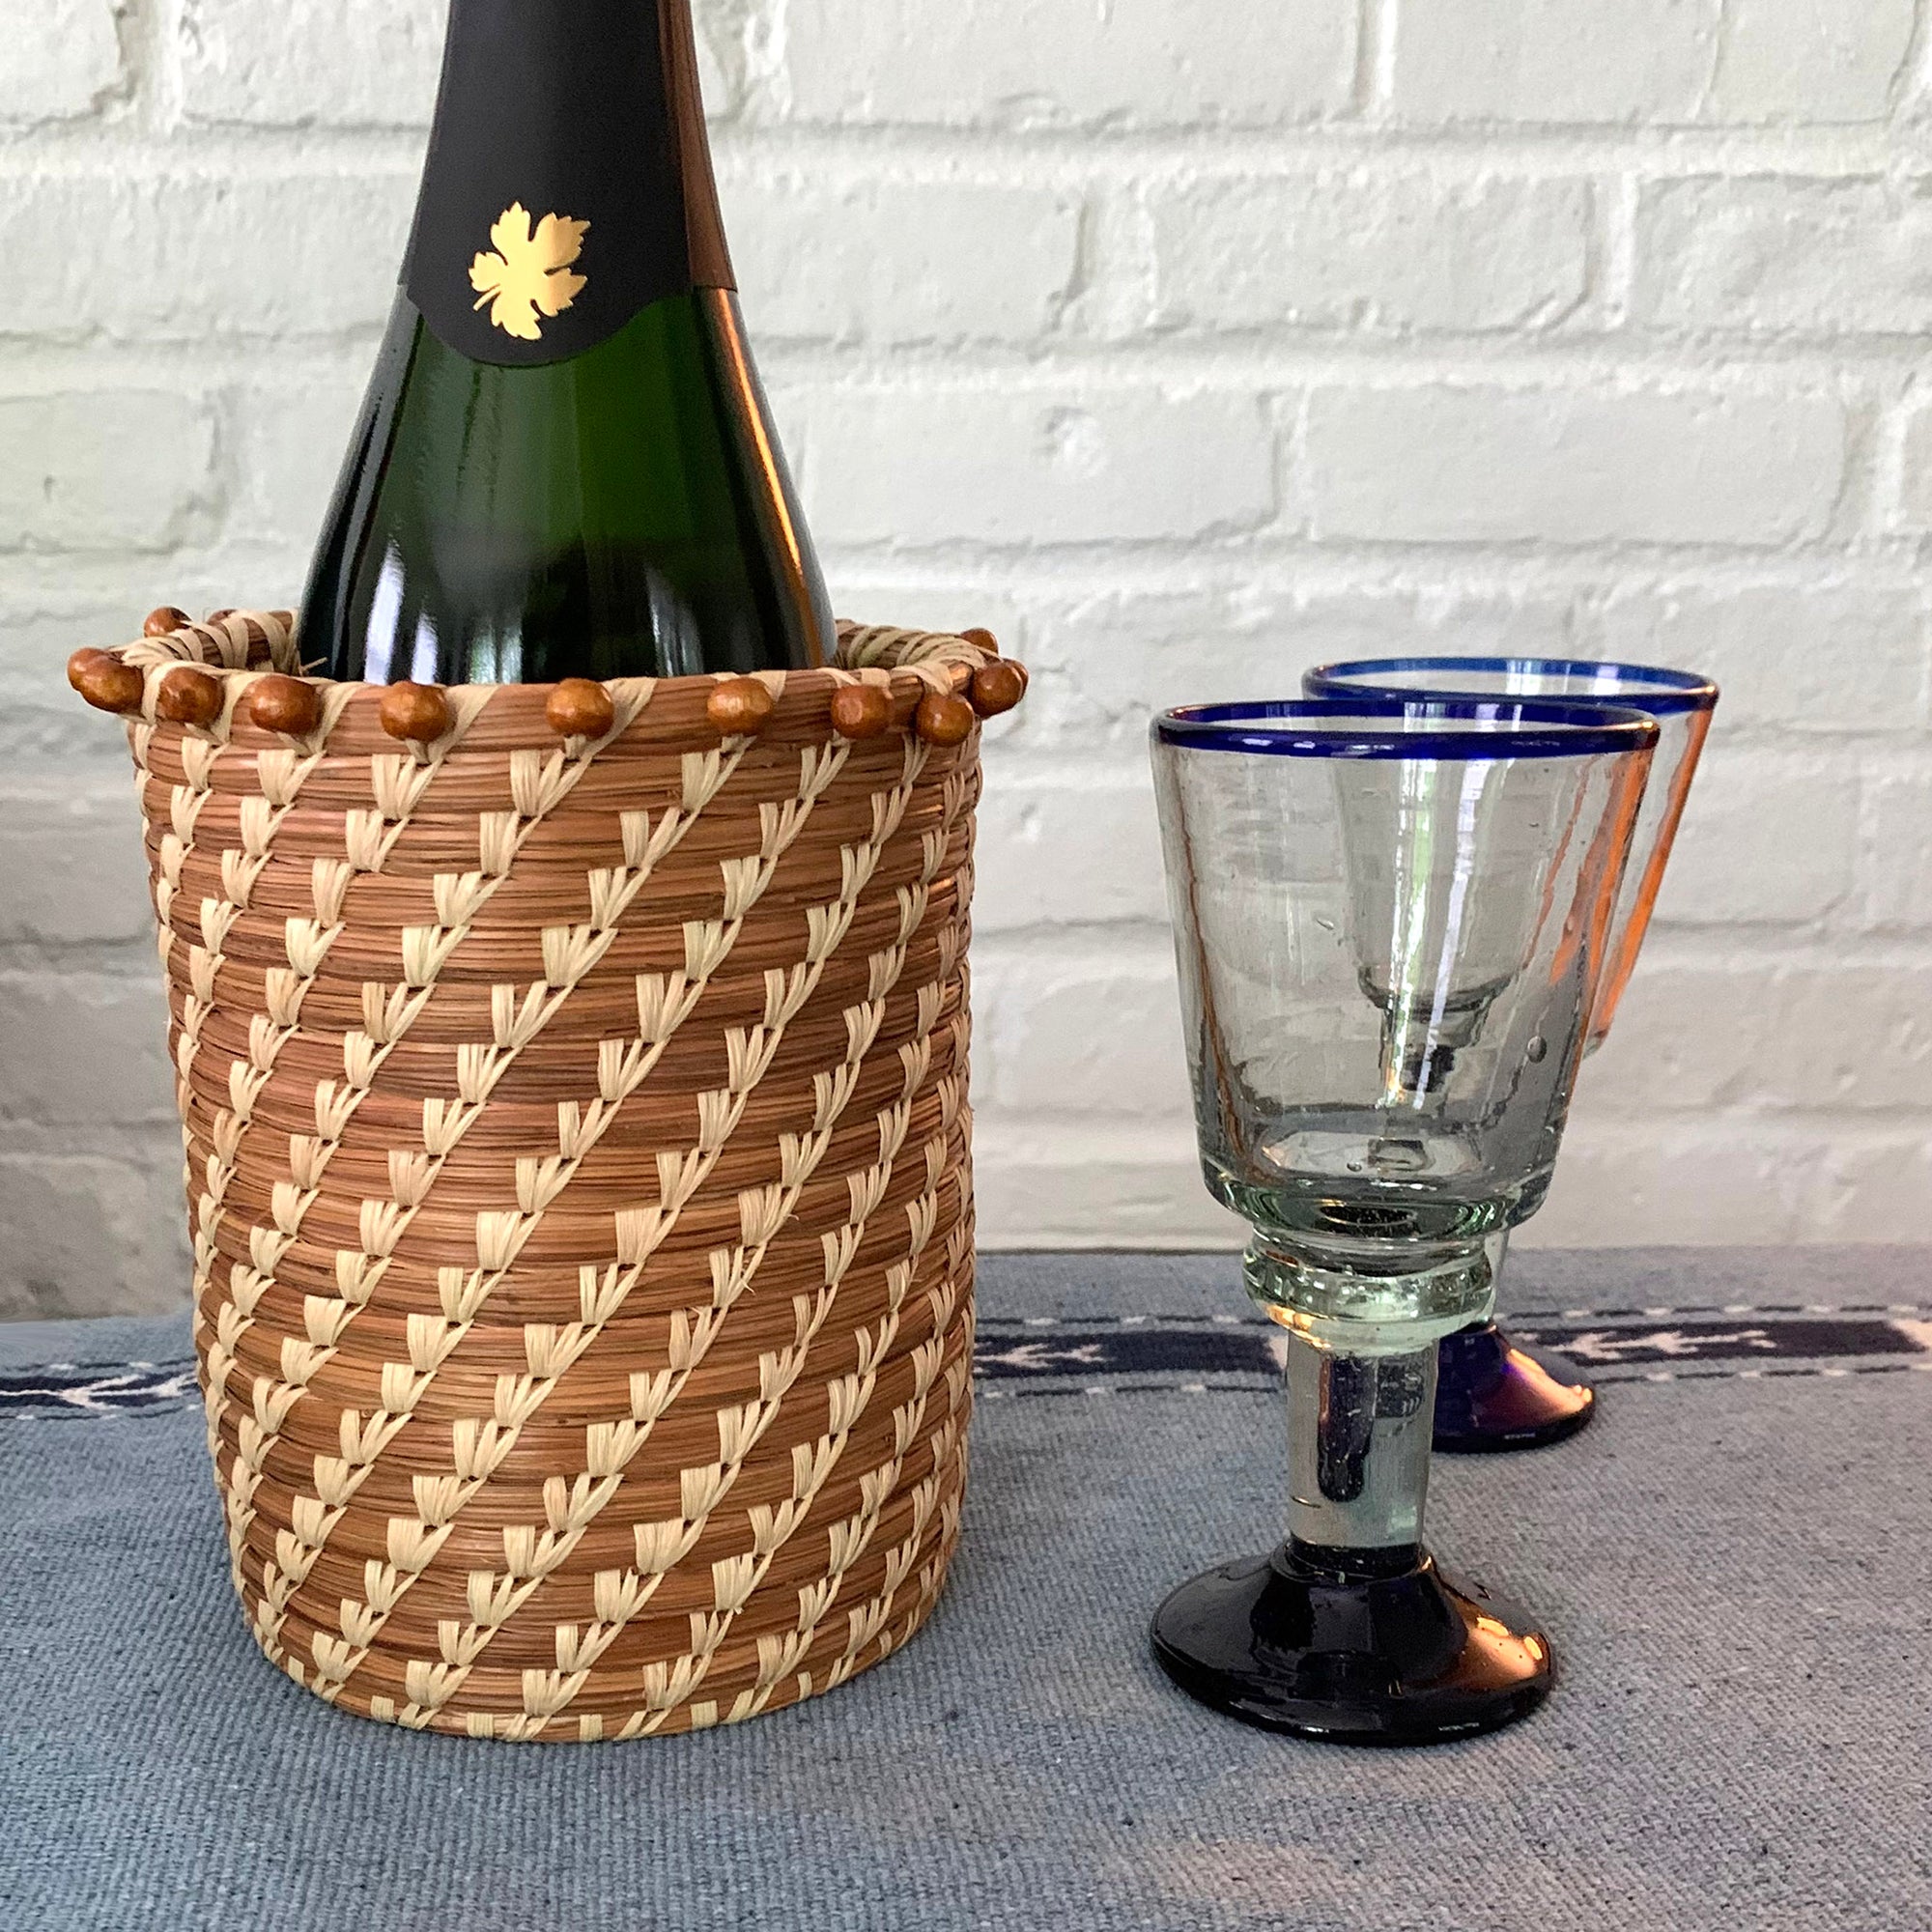 tall pine needle basket with wood beads at rim